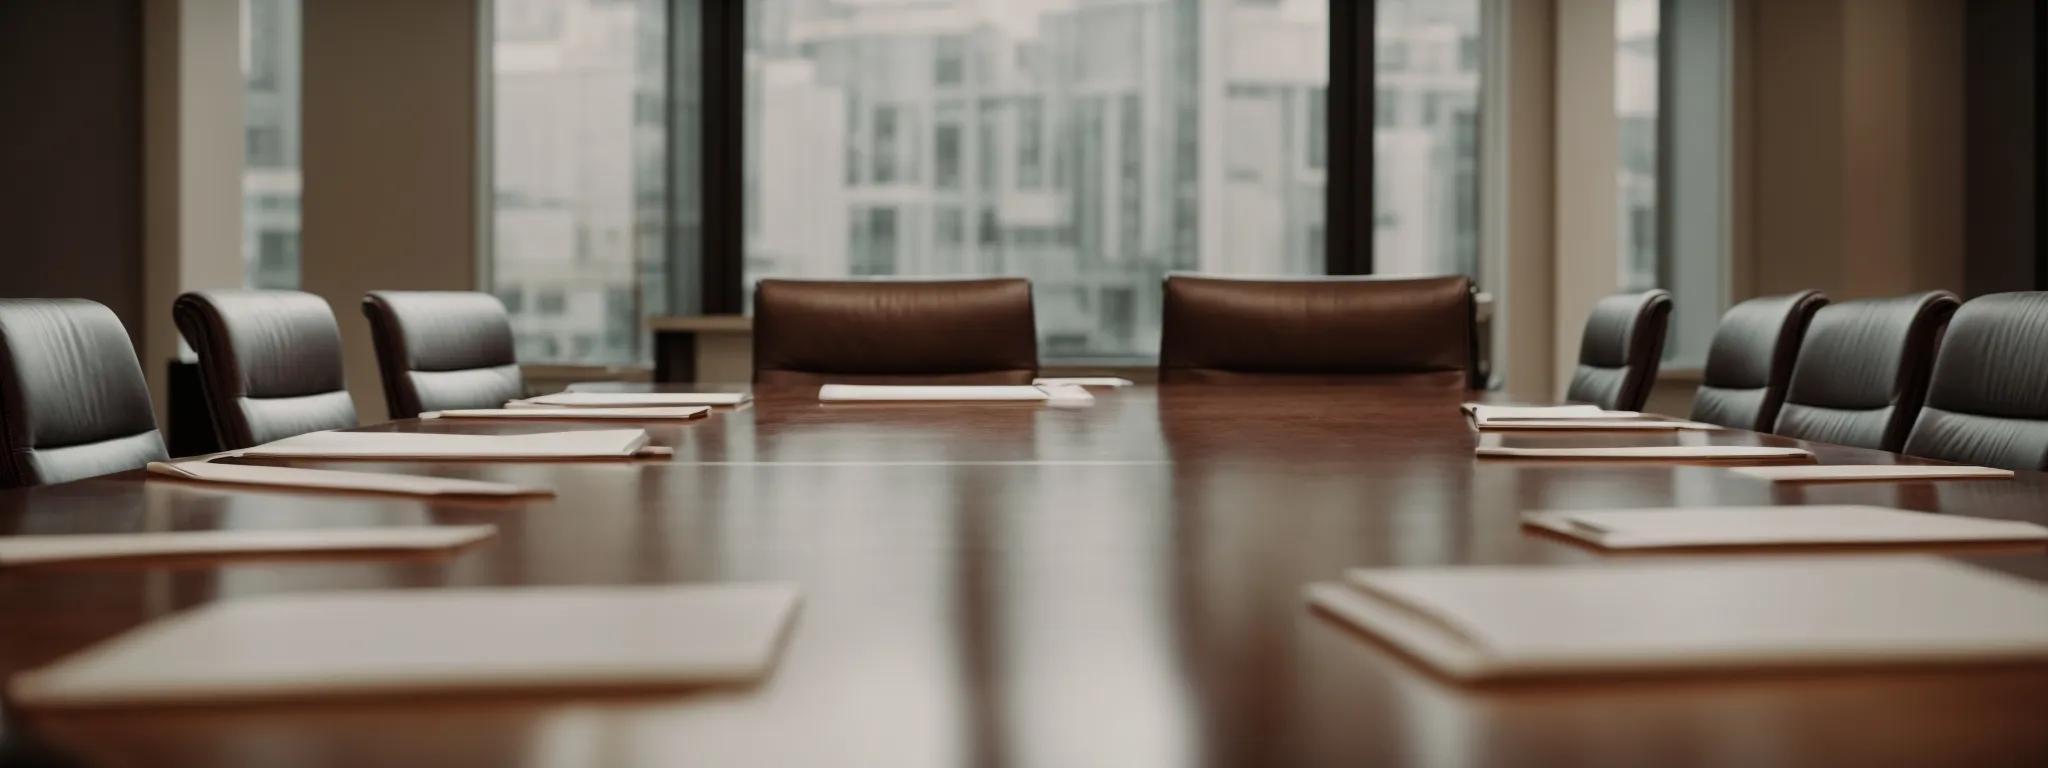 a boardroom table with empty chairs suggests a planning session for international intellectual property protection strategies.